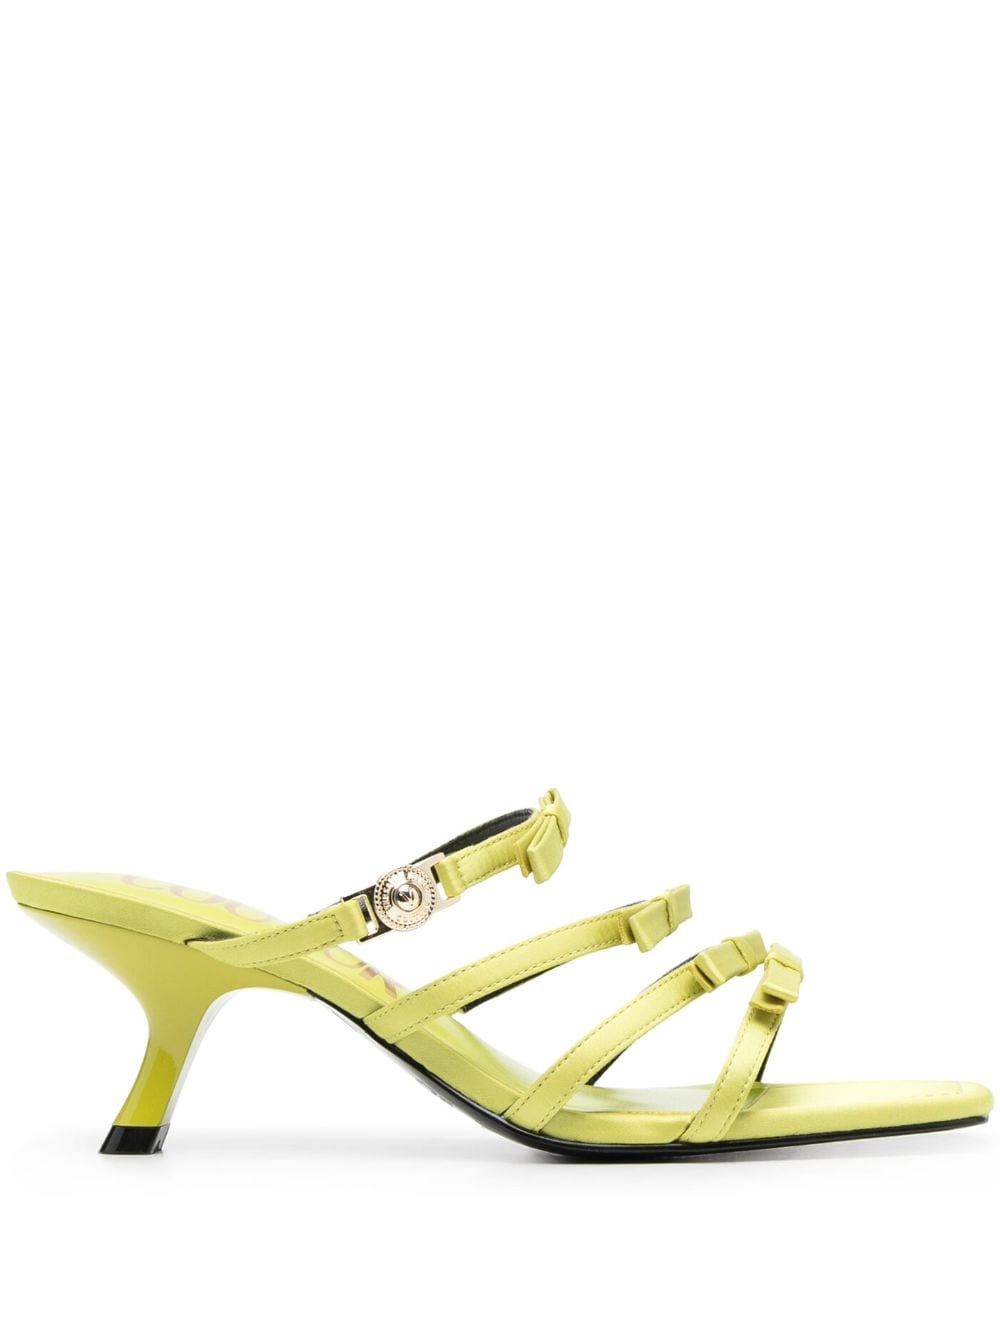 Versace Jeans Couture bow-detail kitten heel sandals - Green von Versace Jeans Couture